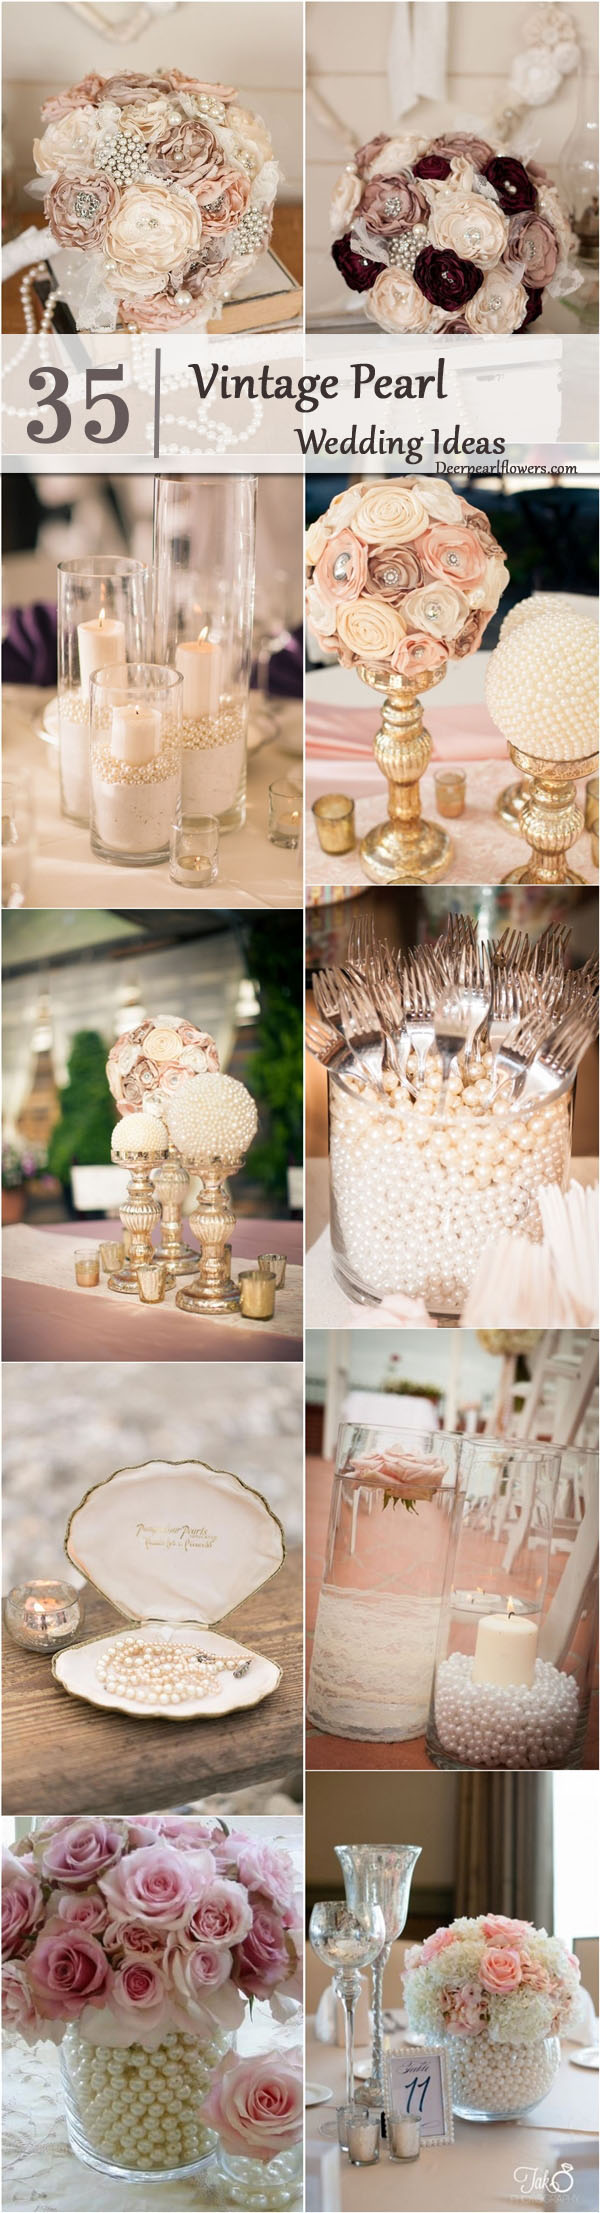 Vintage pearls wedding ideas and themes